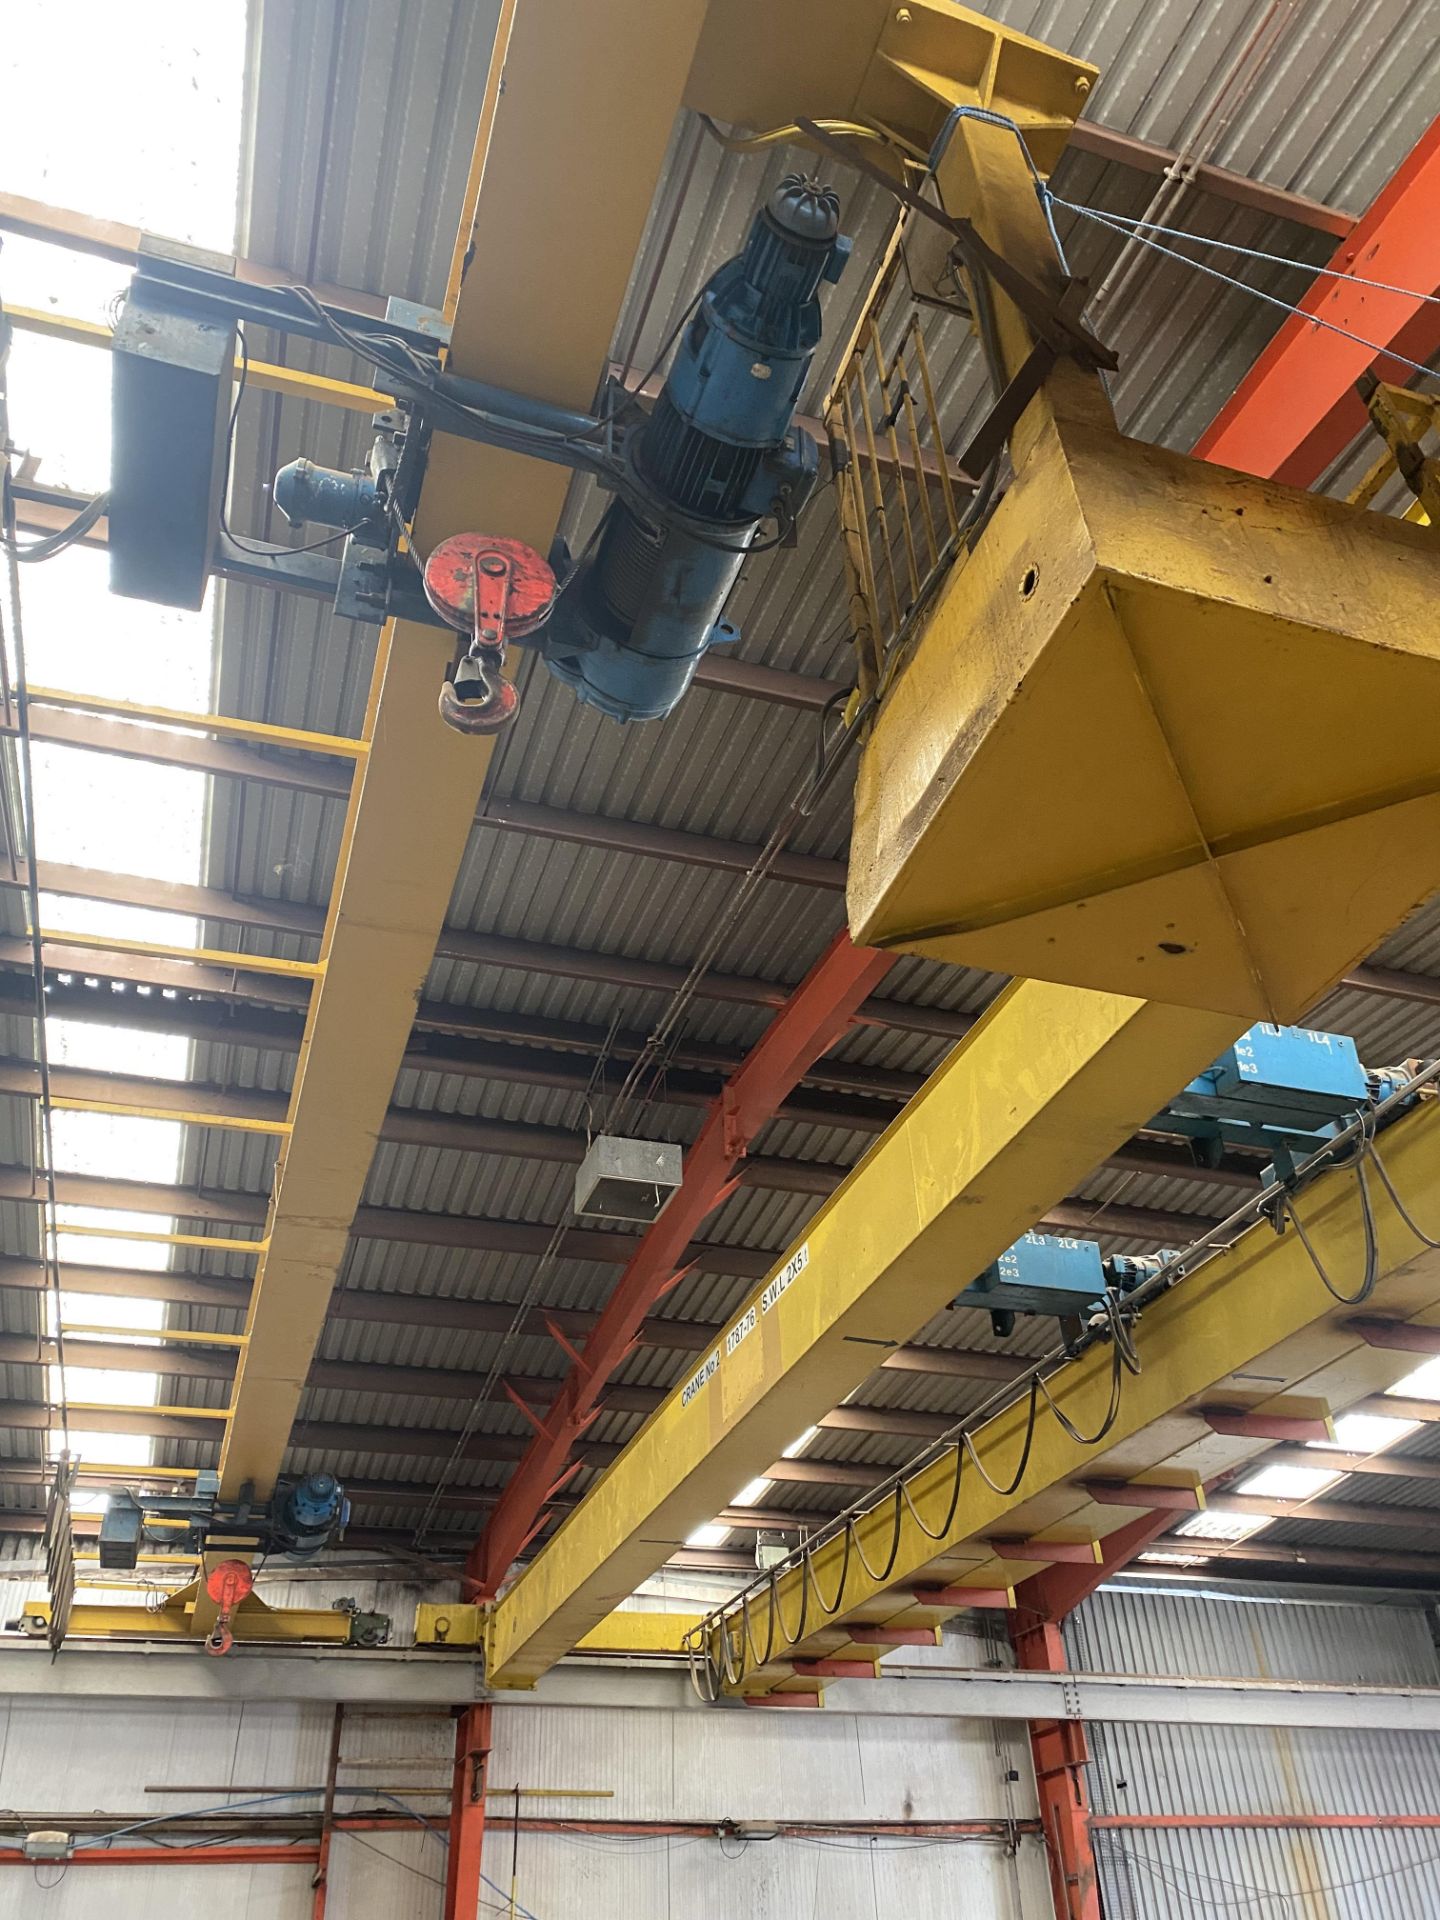 2 X 5T SWL SINGLE GIRDER TRAVELLING OVERHEAD CRANE, crane no. 220, approx. 18m span, with twin - Image 2 of 4